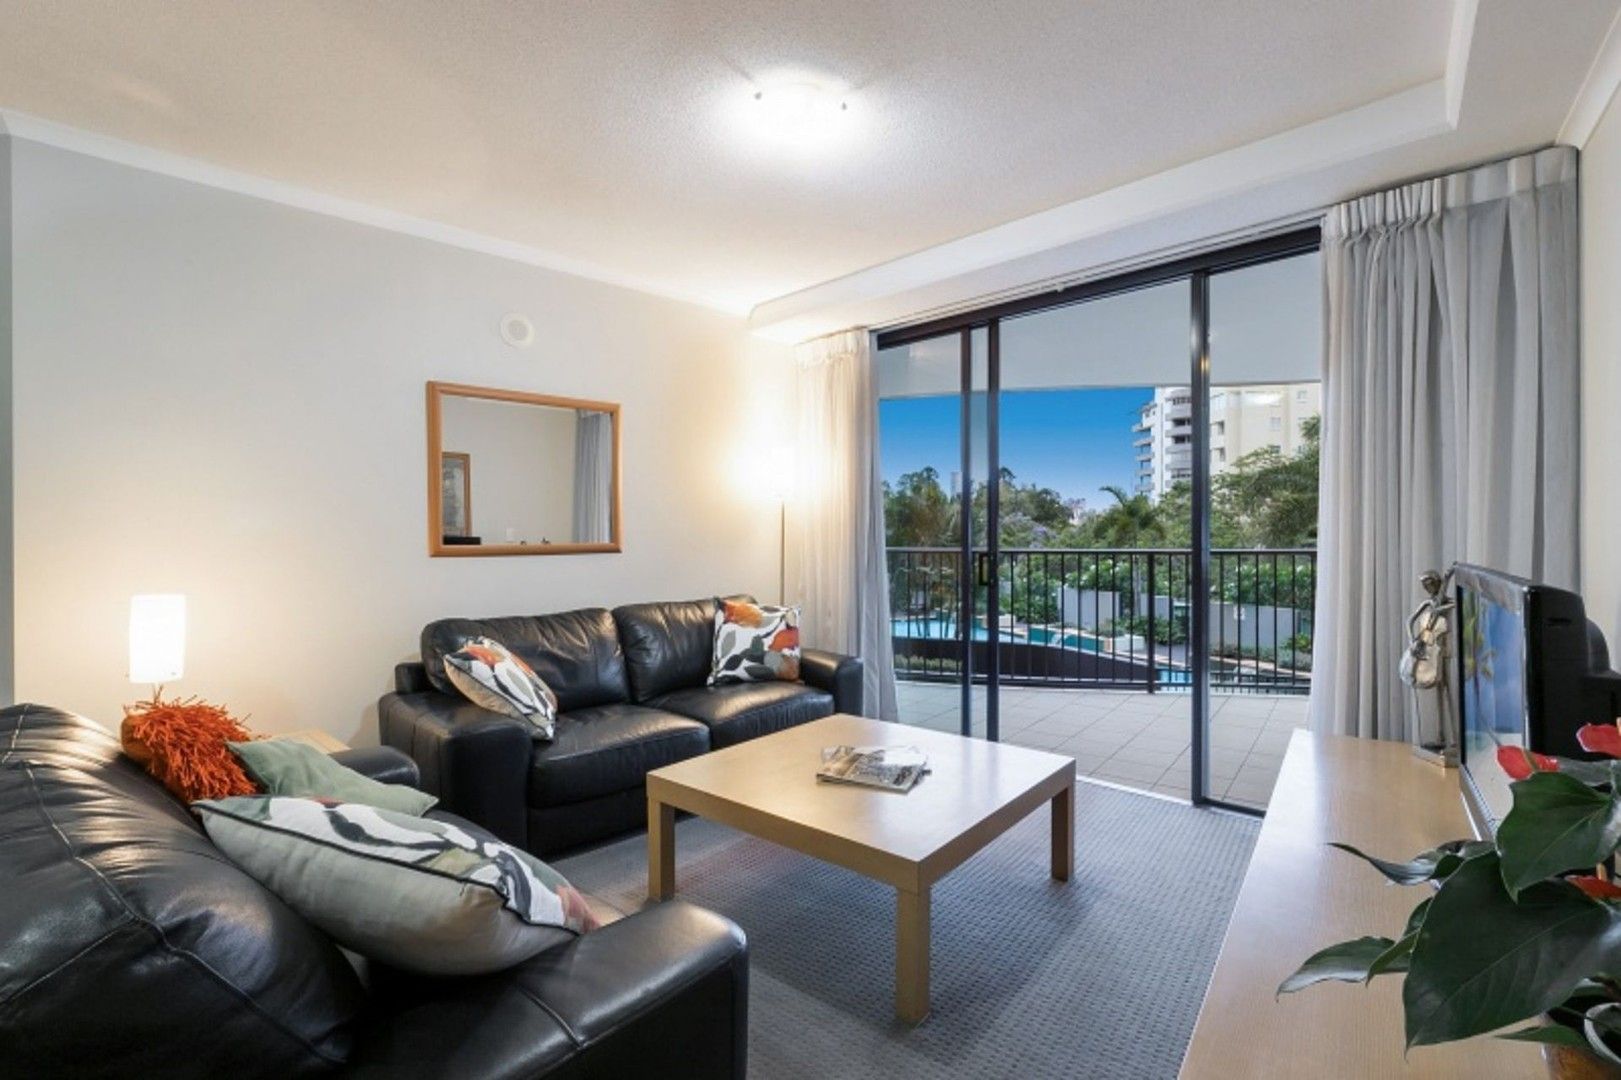 2 bedrooms Apartment / Unit / Flat in 112/8 Land St TOOWONG QLD, 4066